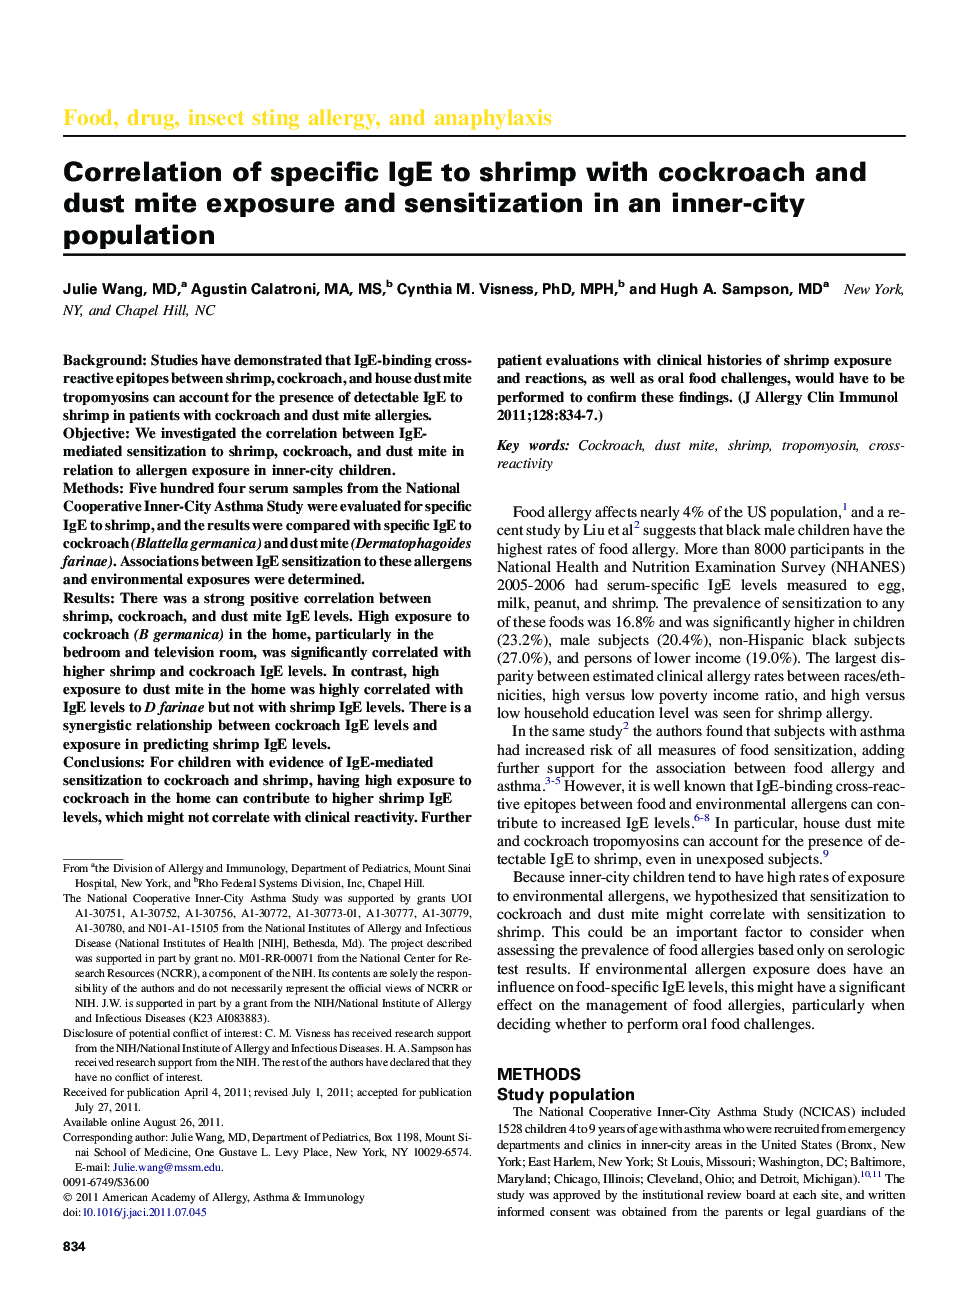 Correlation of specific IgE to shrimp with cockroach and dust mite exposure and sensitization in an inner-city population 